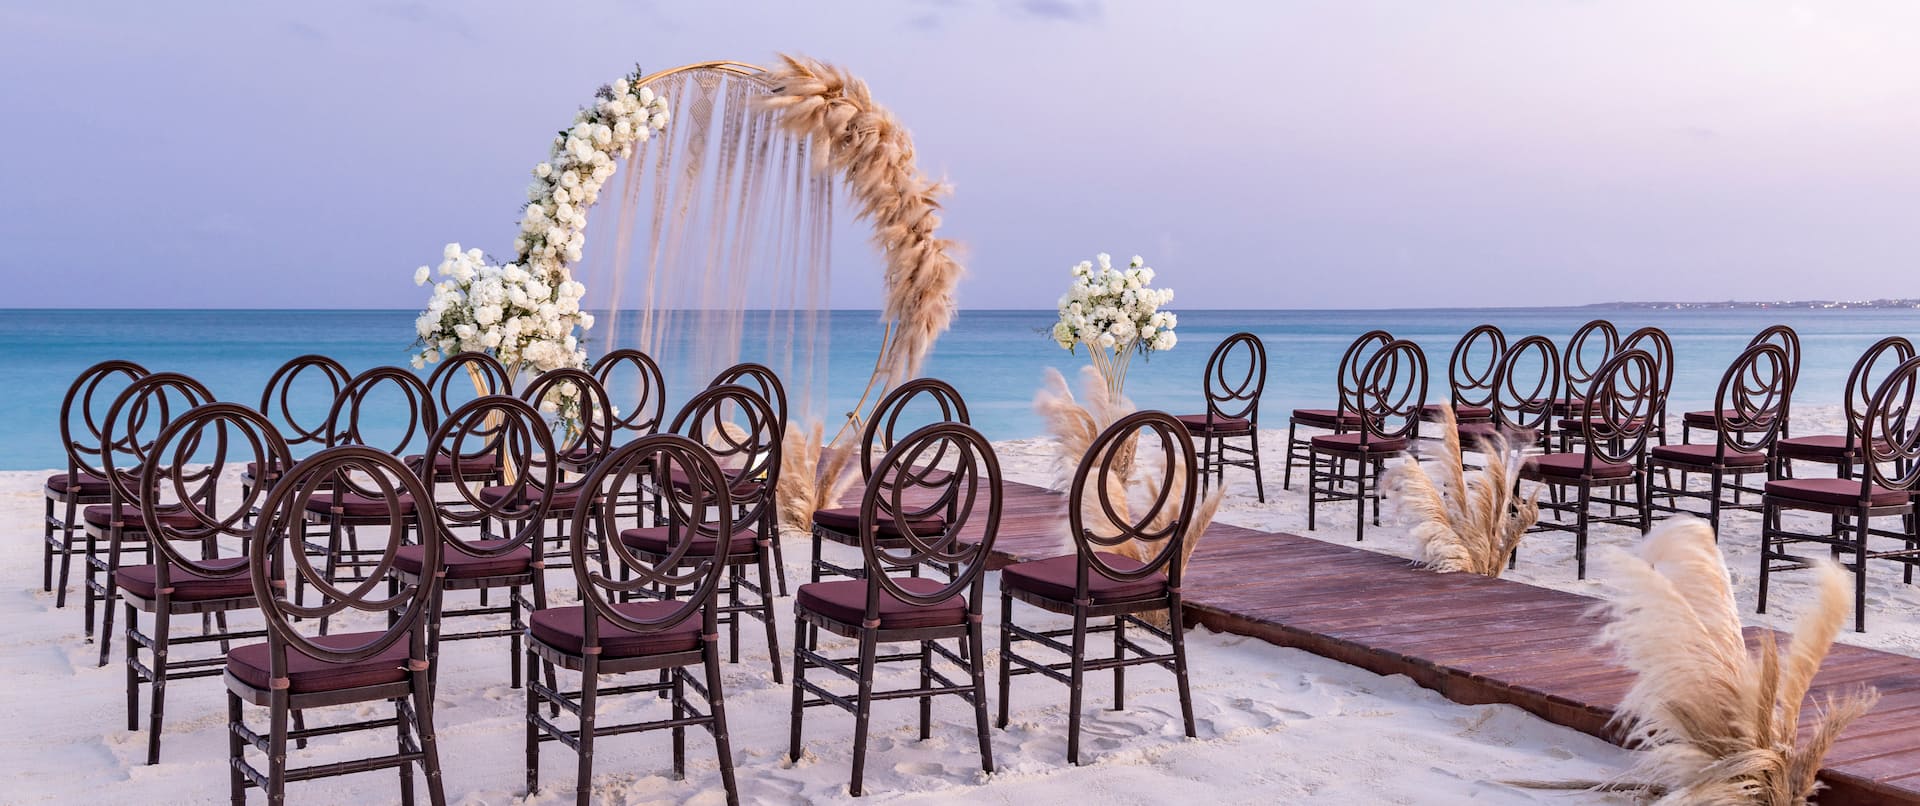 beach wedding ceremony chairs and flower arch